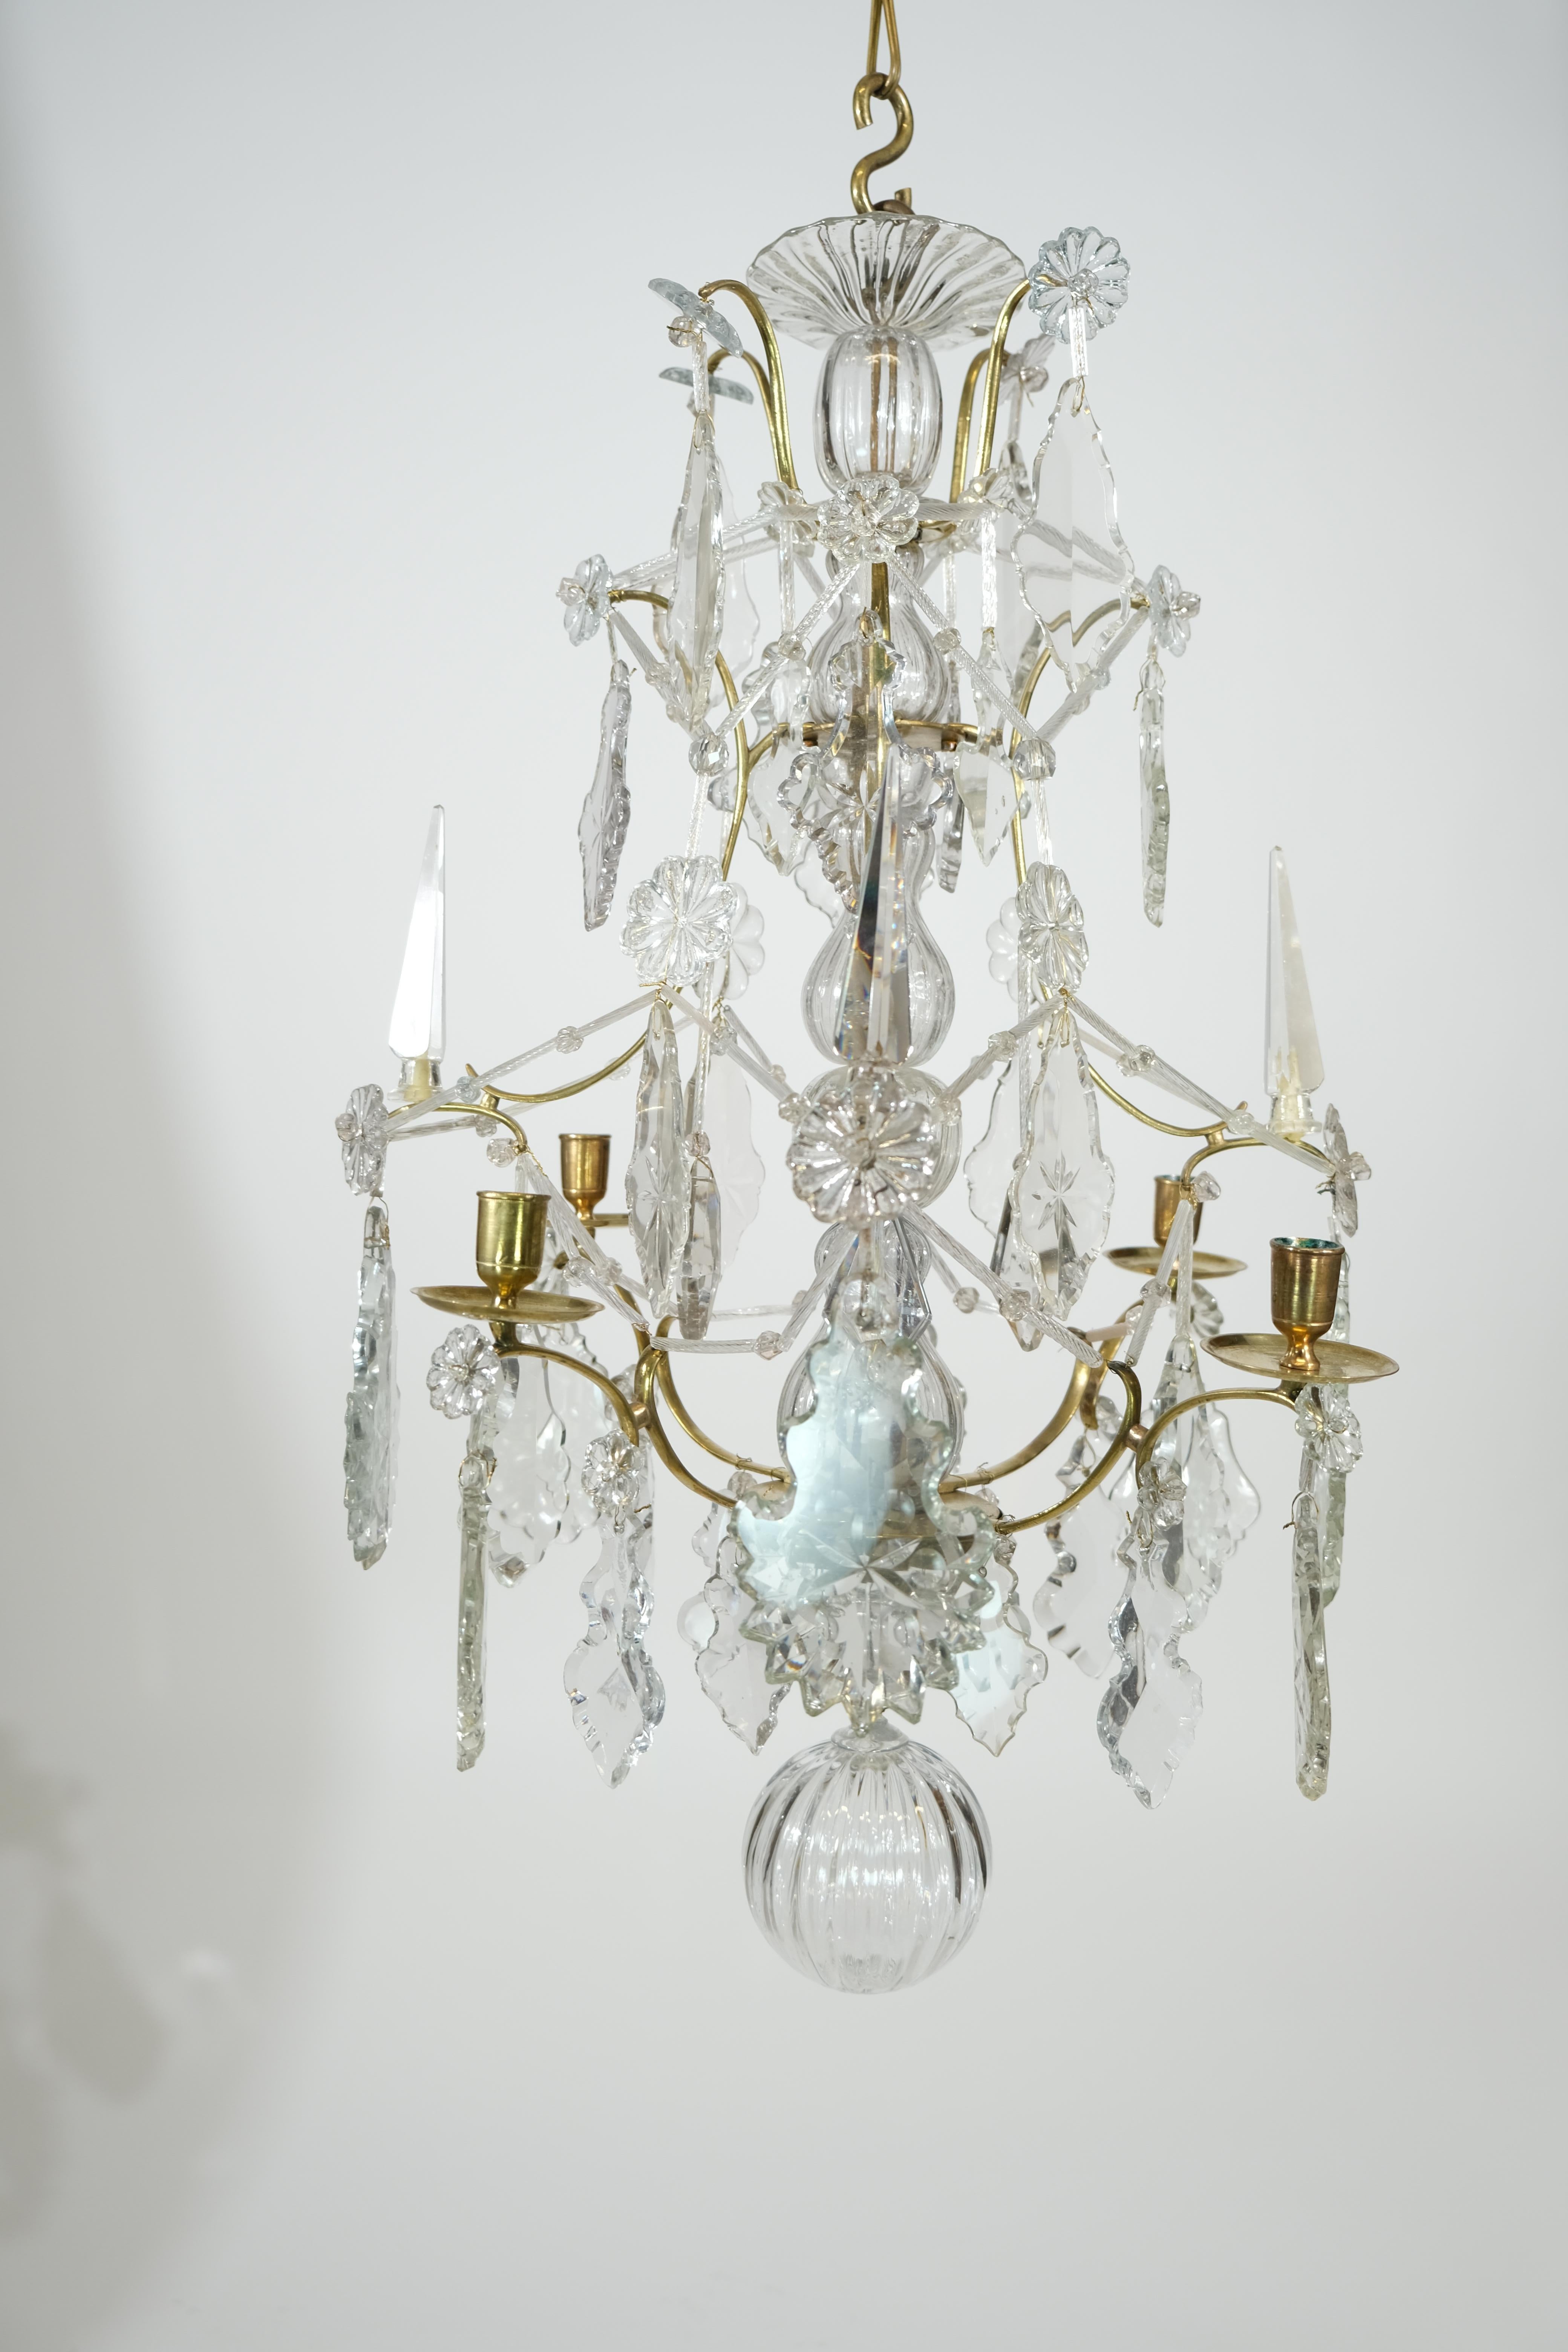 Cast Swedish Rococo Brass and Cut-Glass Chandelier, 18th C